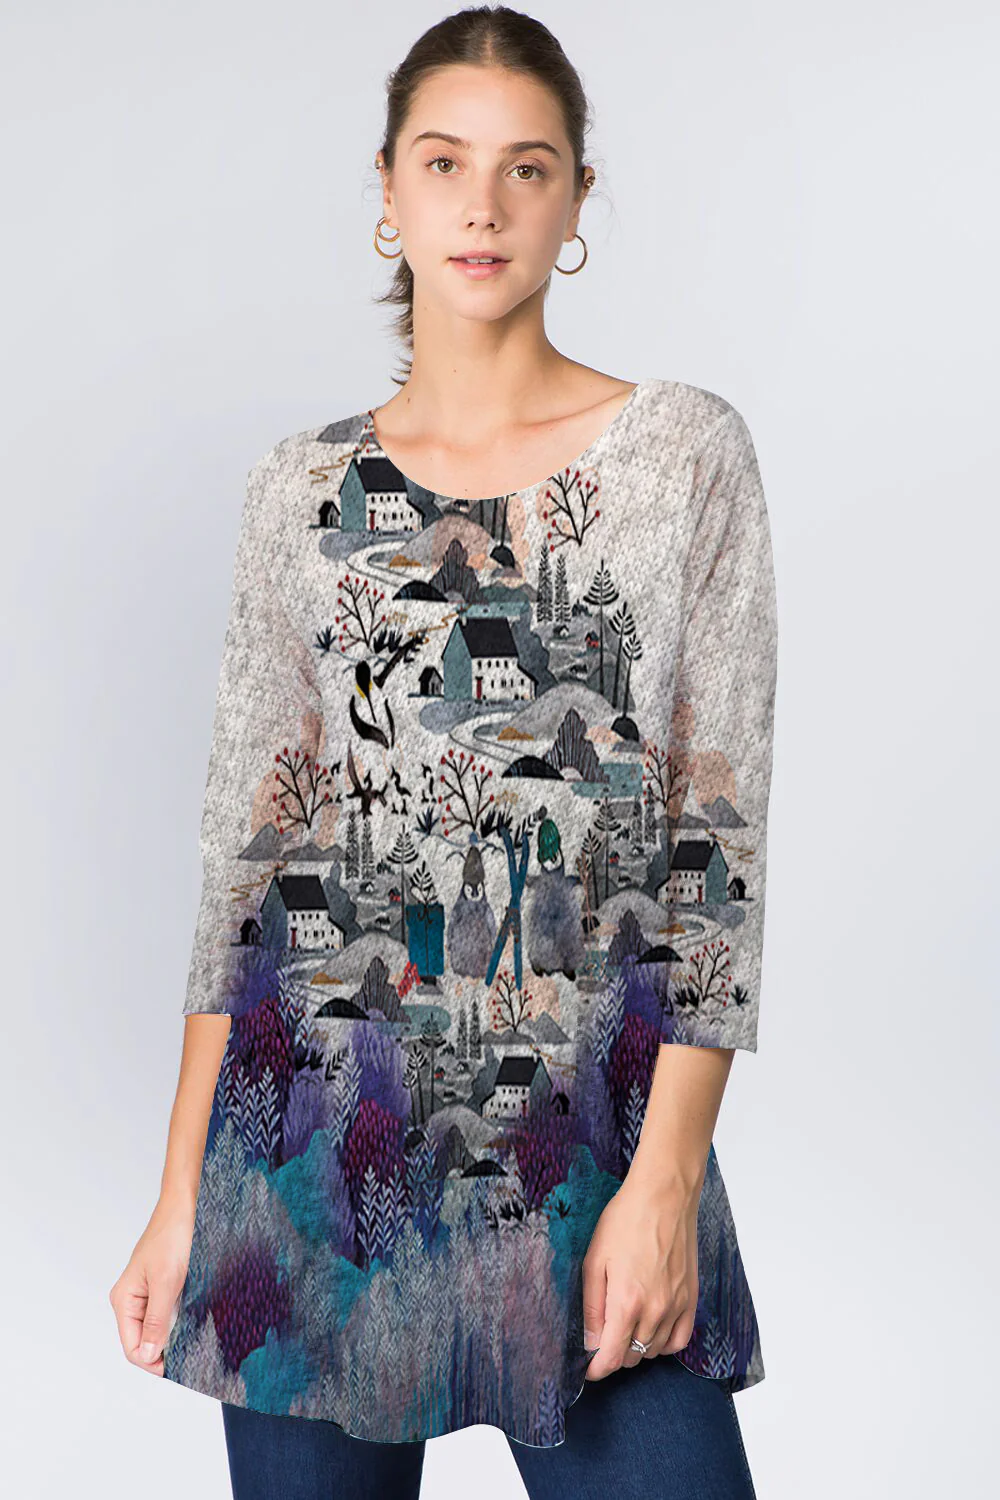 Penguin A-Line Holiday Tunic